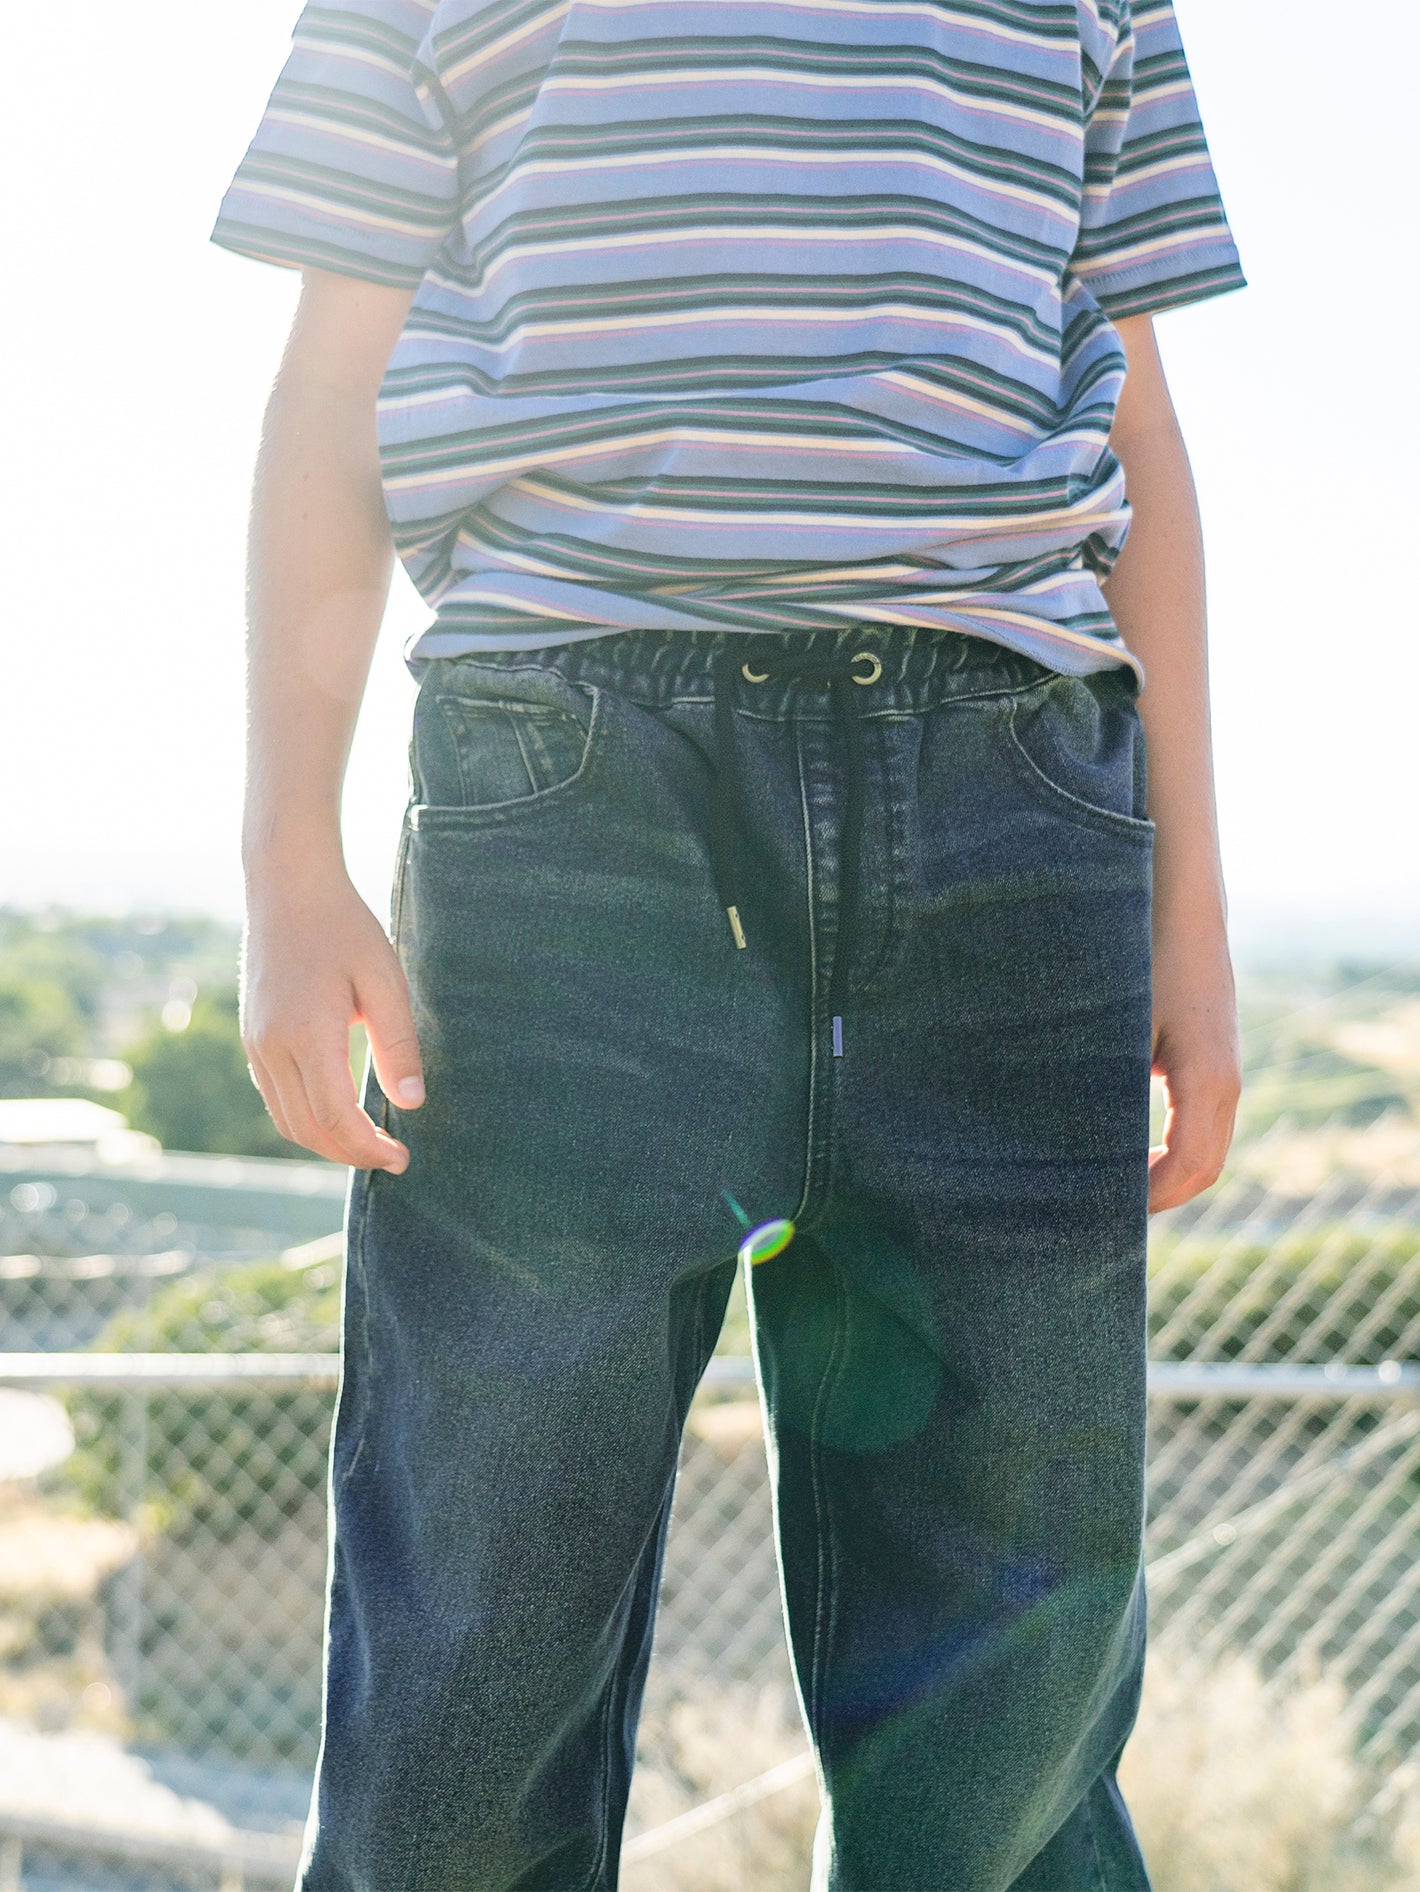 Boys Denim Cotton Casual Boys Jeans With Elastic Waistband Sizes 4 12 Years  From Kong06, $17.98